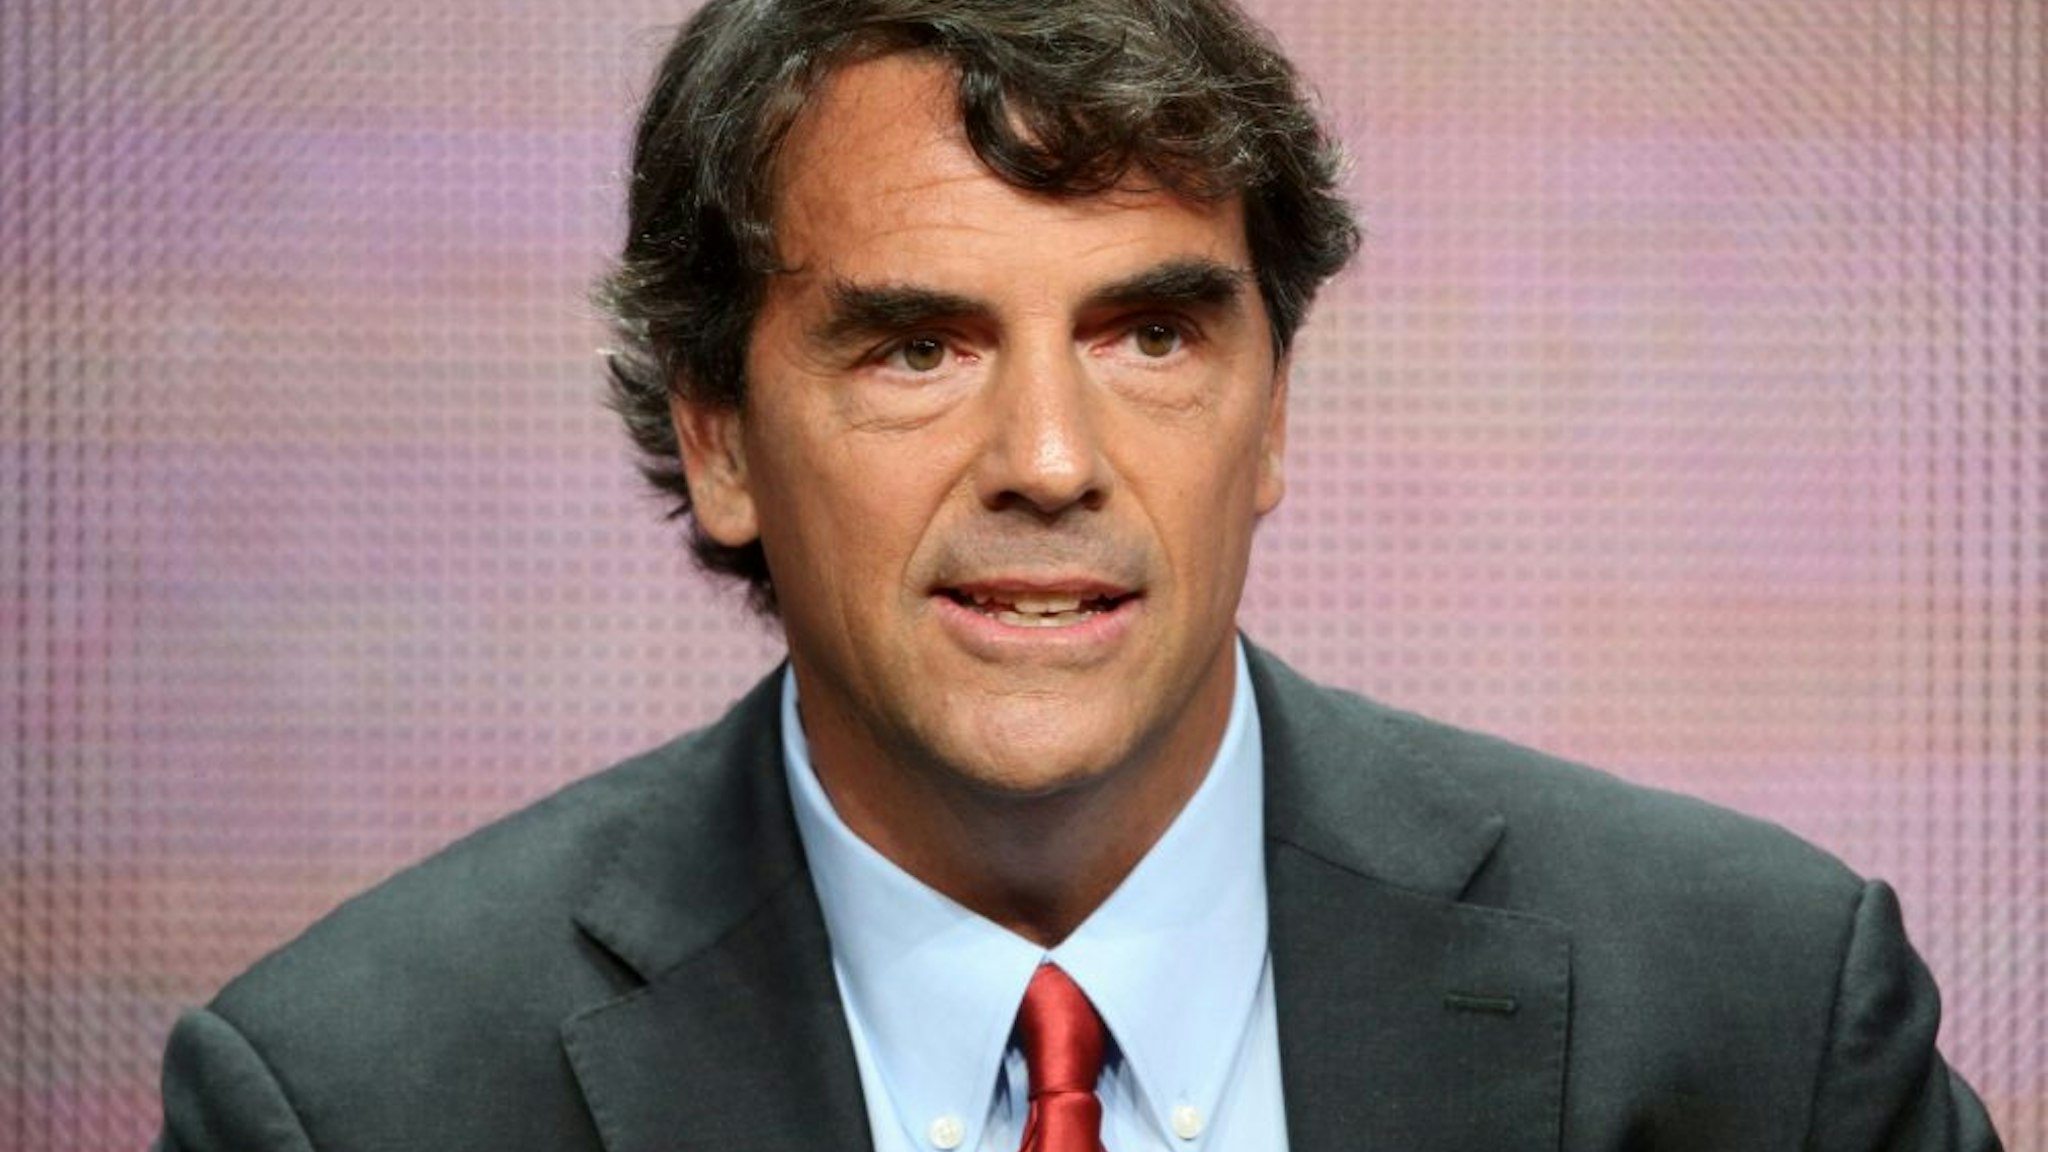 BEVERLY HILLS, CA - AUGUST 05: Executive producer Tim Draper speaks onstage during the 'Startup U' panel discussion at the ABC Family portion of the 2015 Summer TCA Tour at The Beverly Hilton Hotel on August 5, 2015 in Beverly Hills, California.